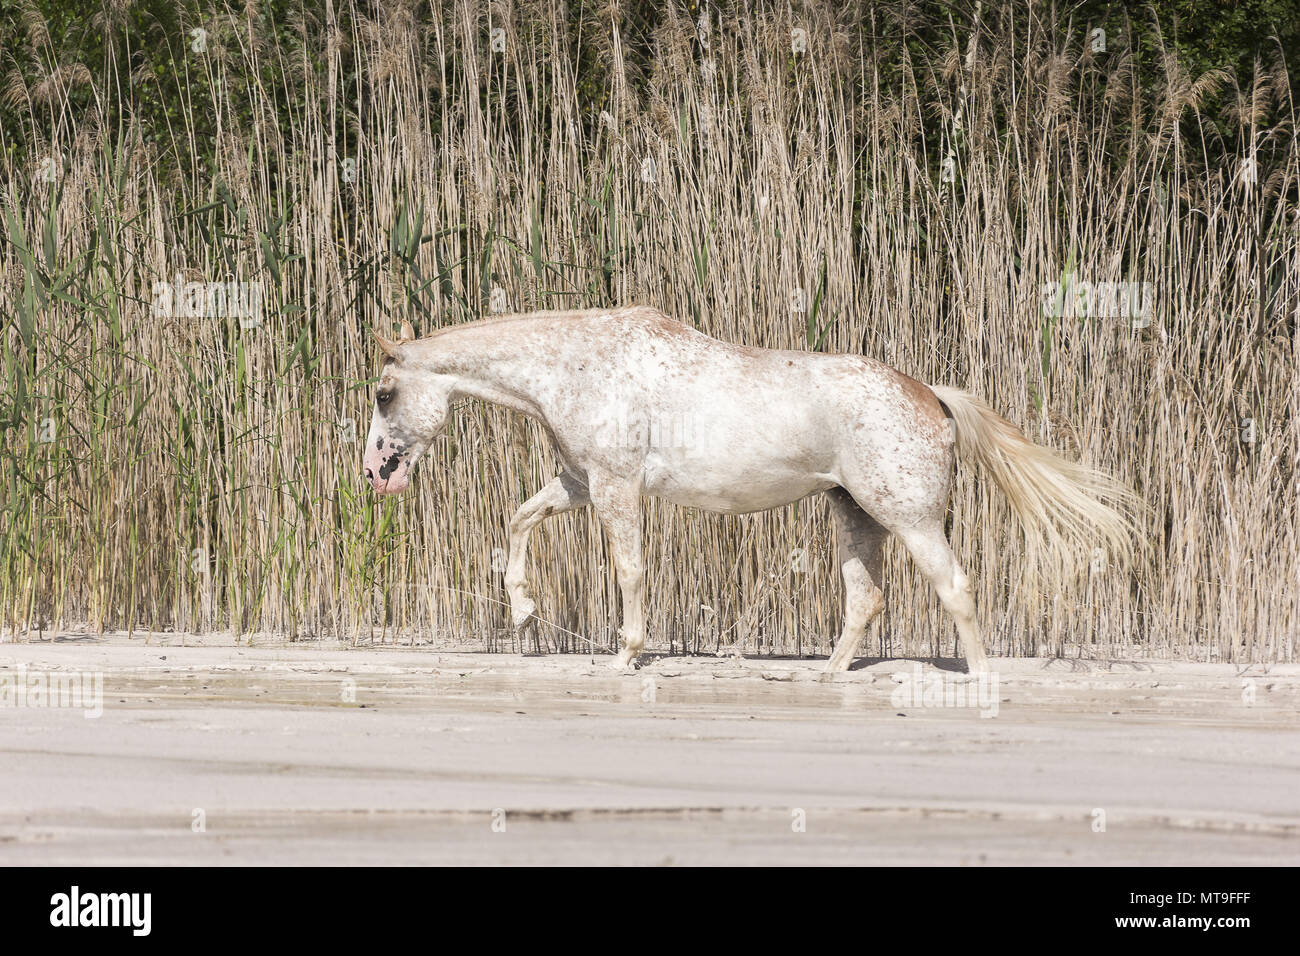 Appaloosa. Mare walking on kaolin sand with reed in background. Poland Stock Photo